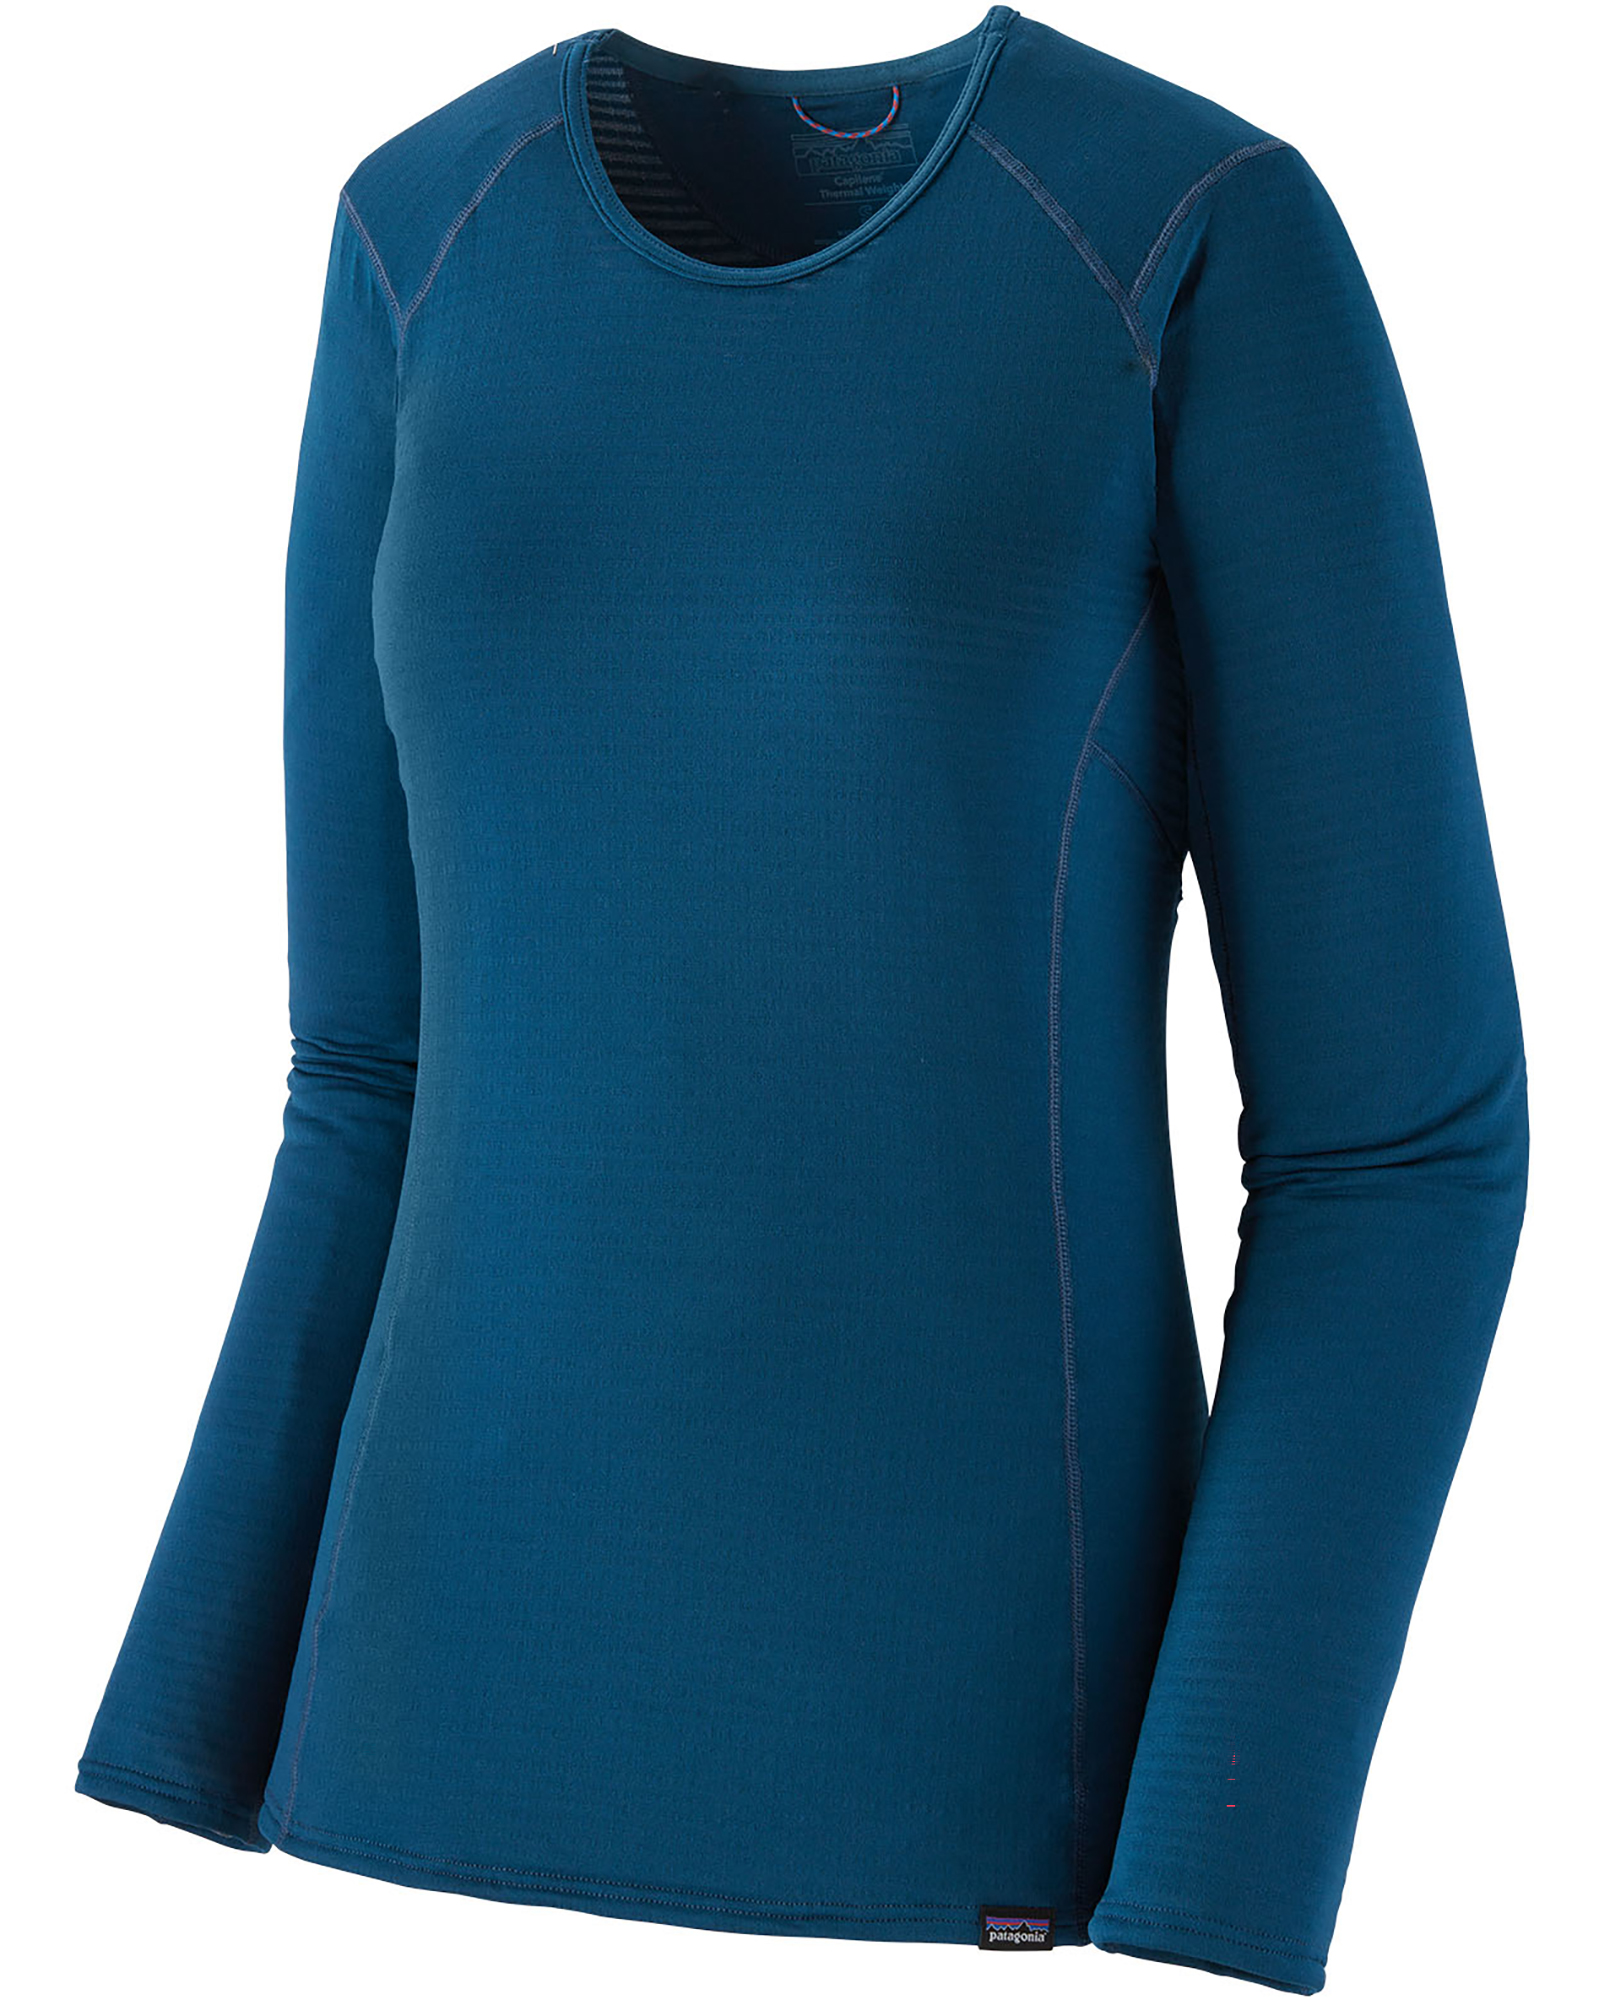 Patagonia Capilene Women’s Thermal Weight Crew Neck - Lagoon Blue L